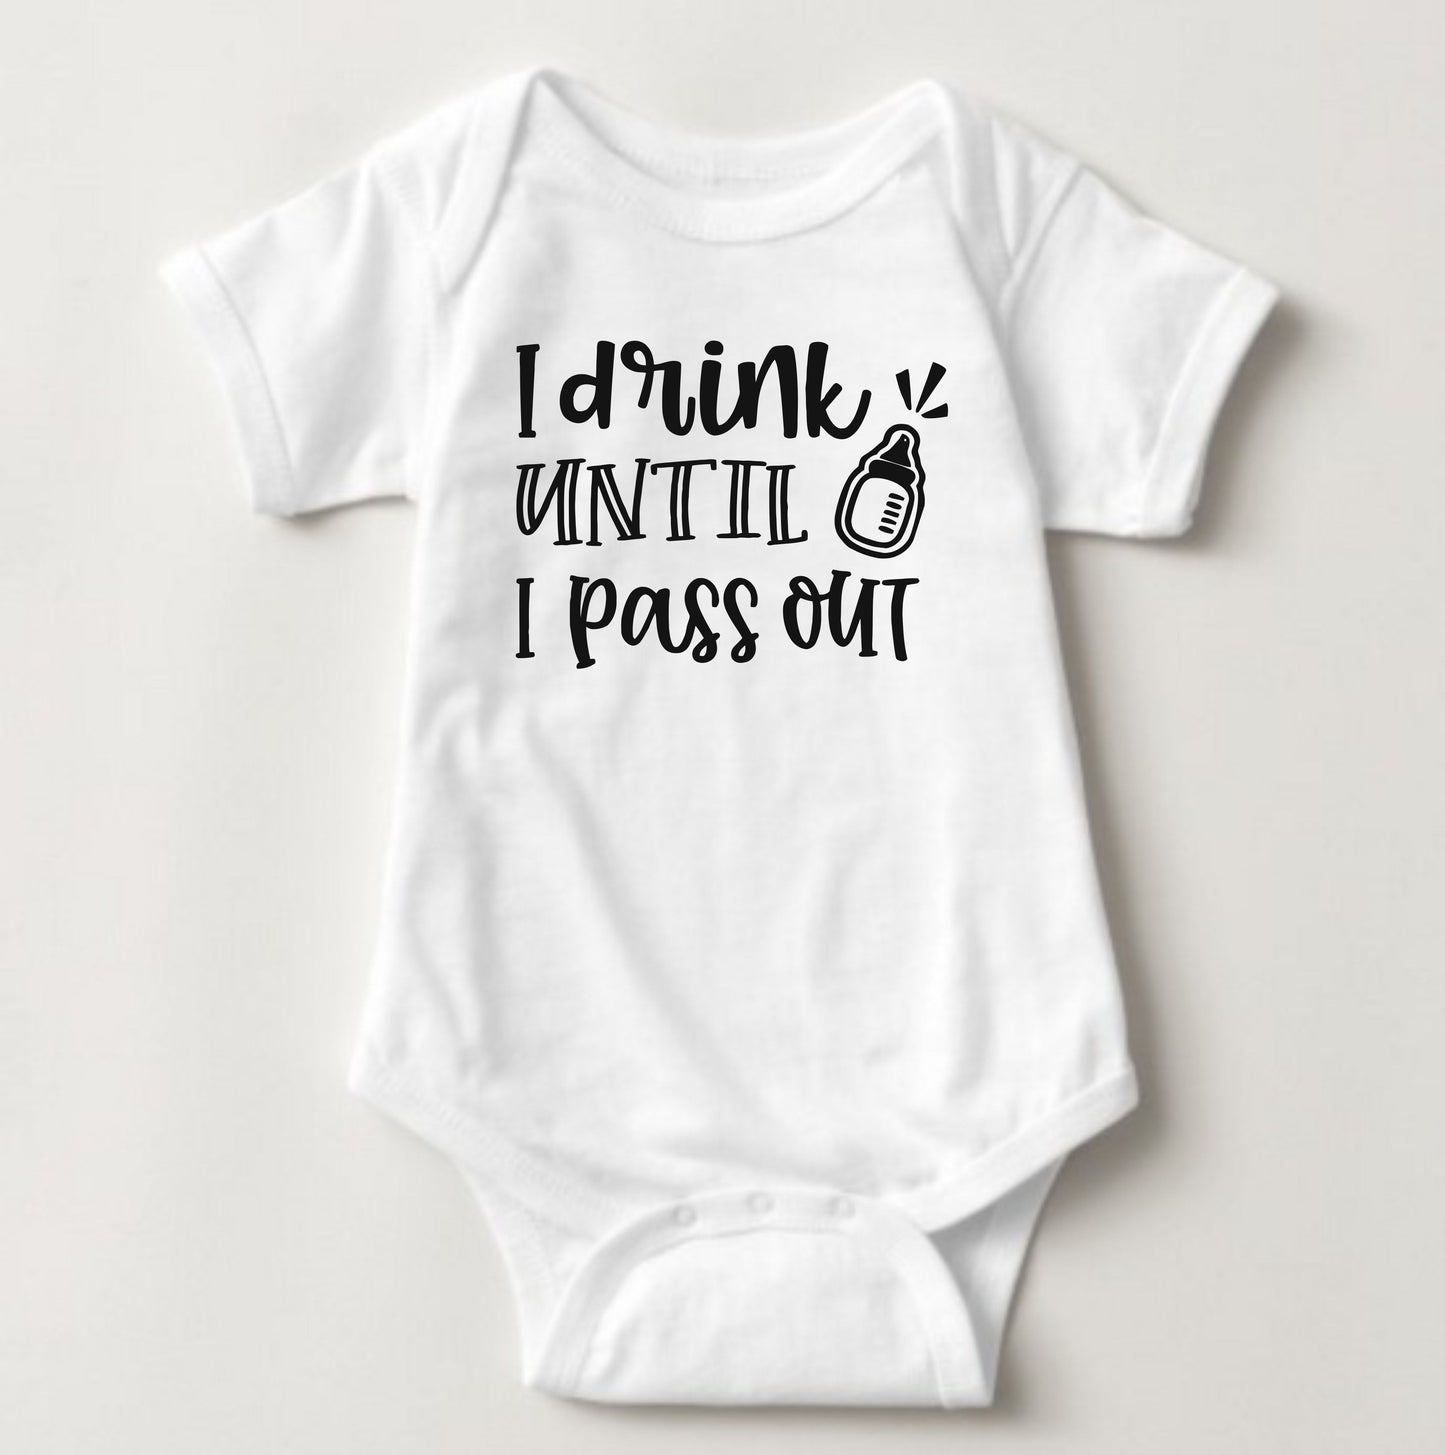 Baby Statement Onesies- Drink Pass Out